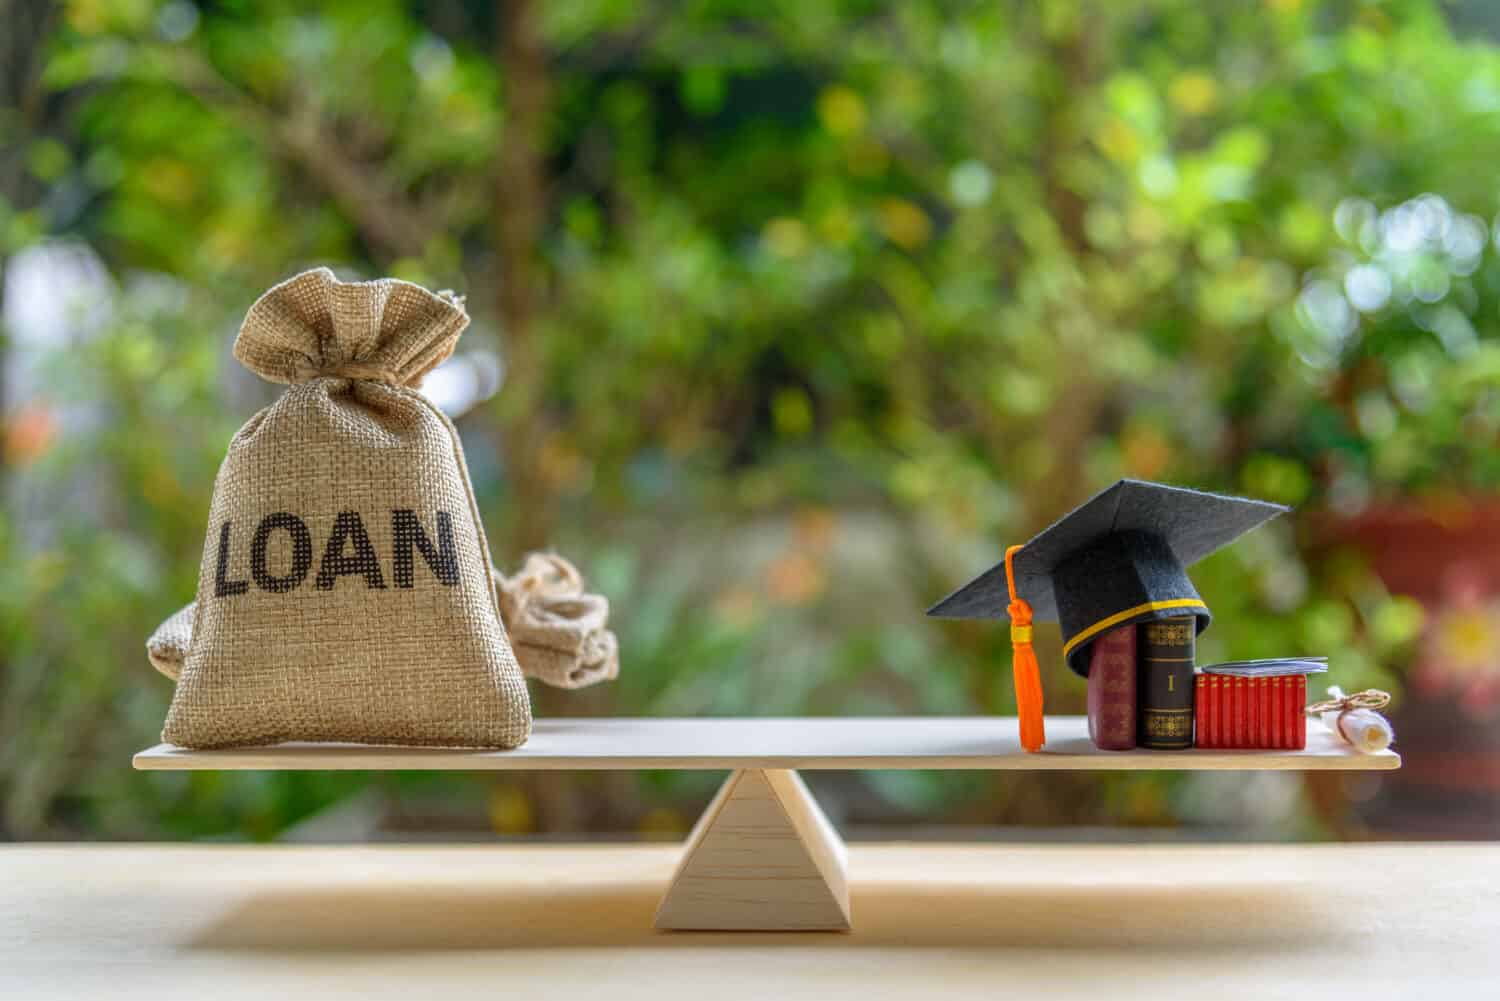 Education loan for study overseas / student loan concept : Mortarboard, loan bag on balance scale, depicts loans issued for the purpose of attending an academic university and pursuing academic degree